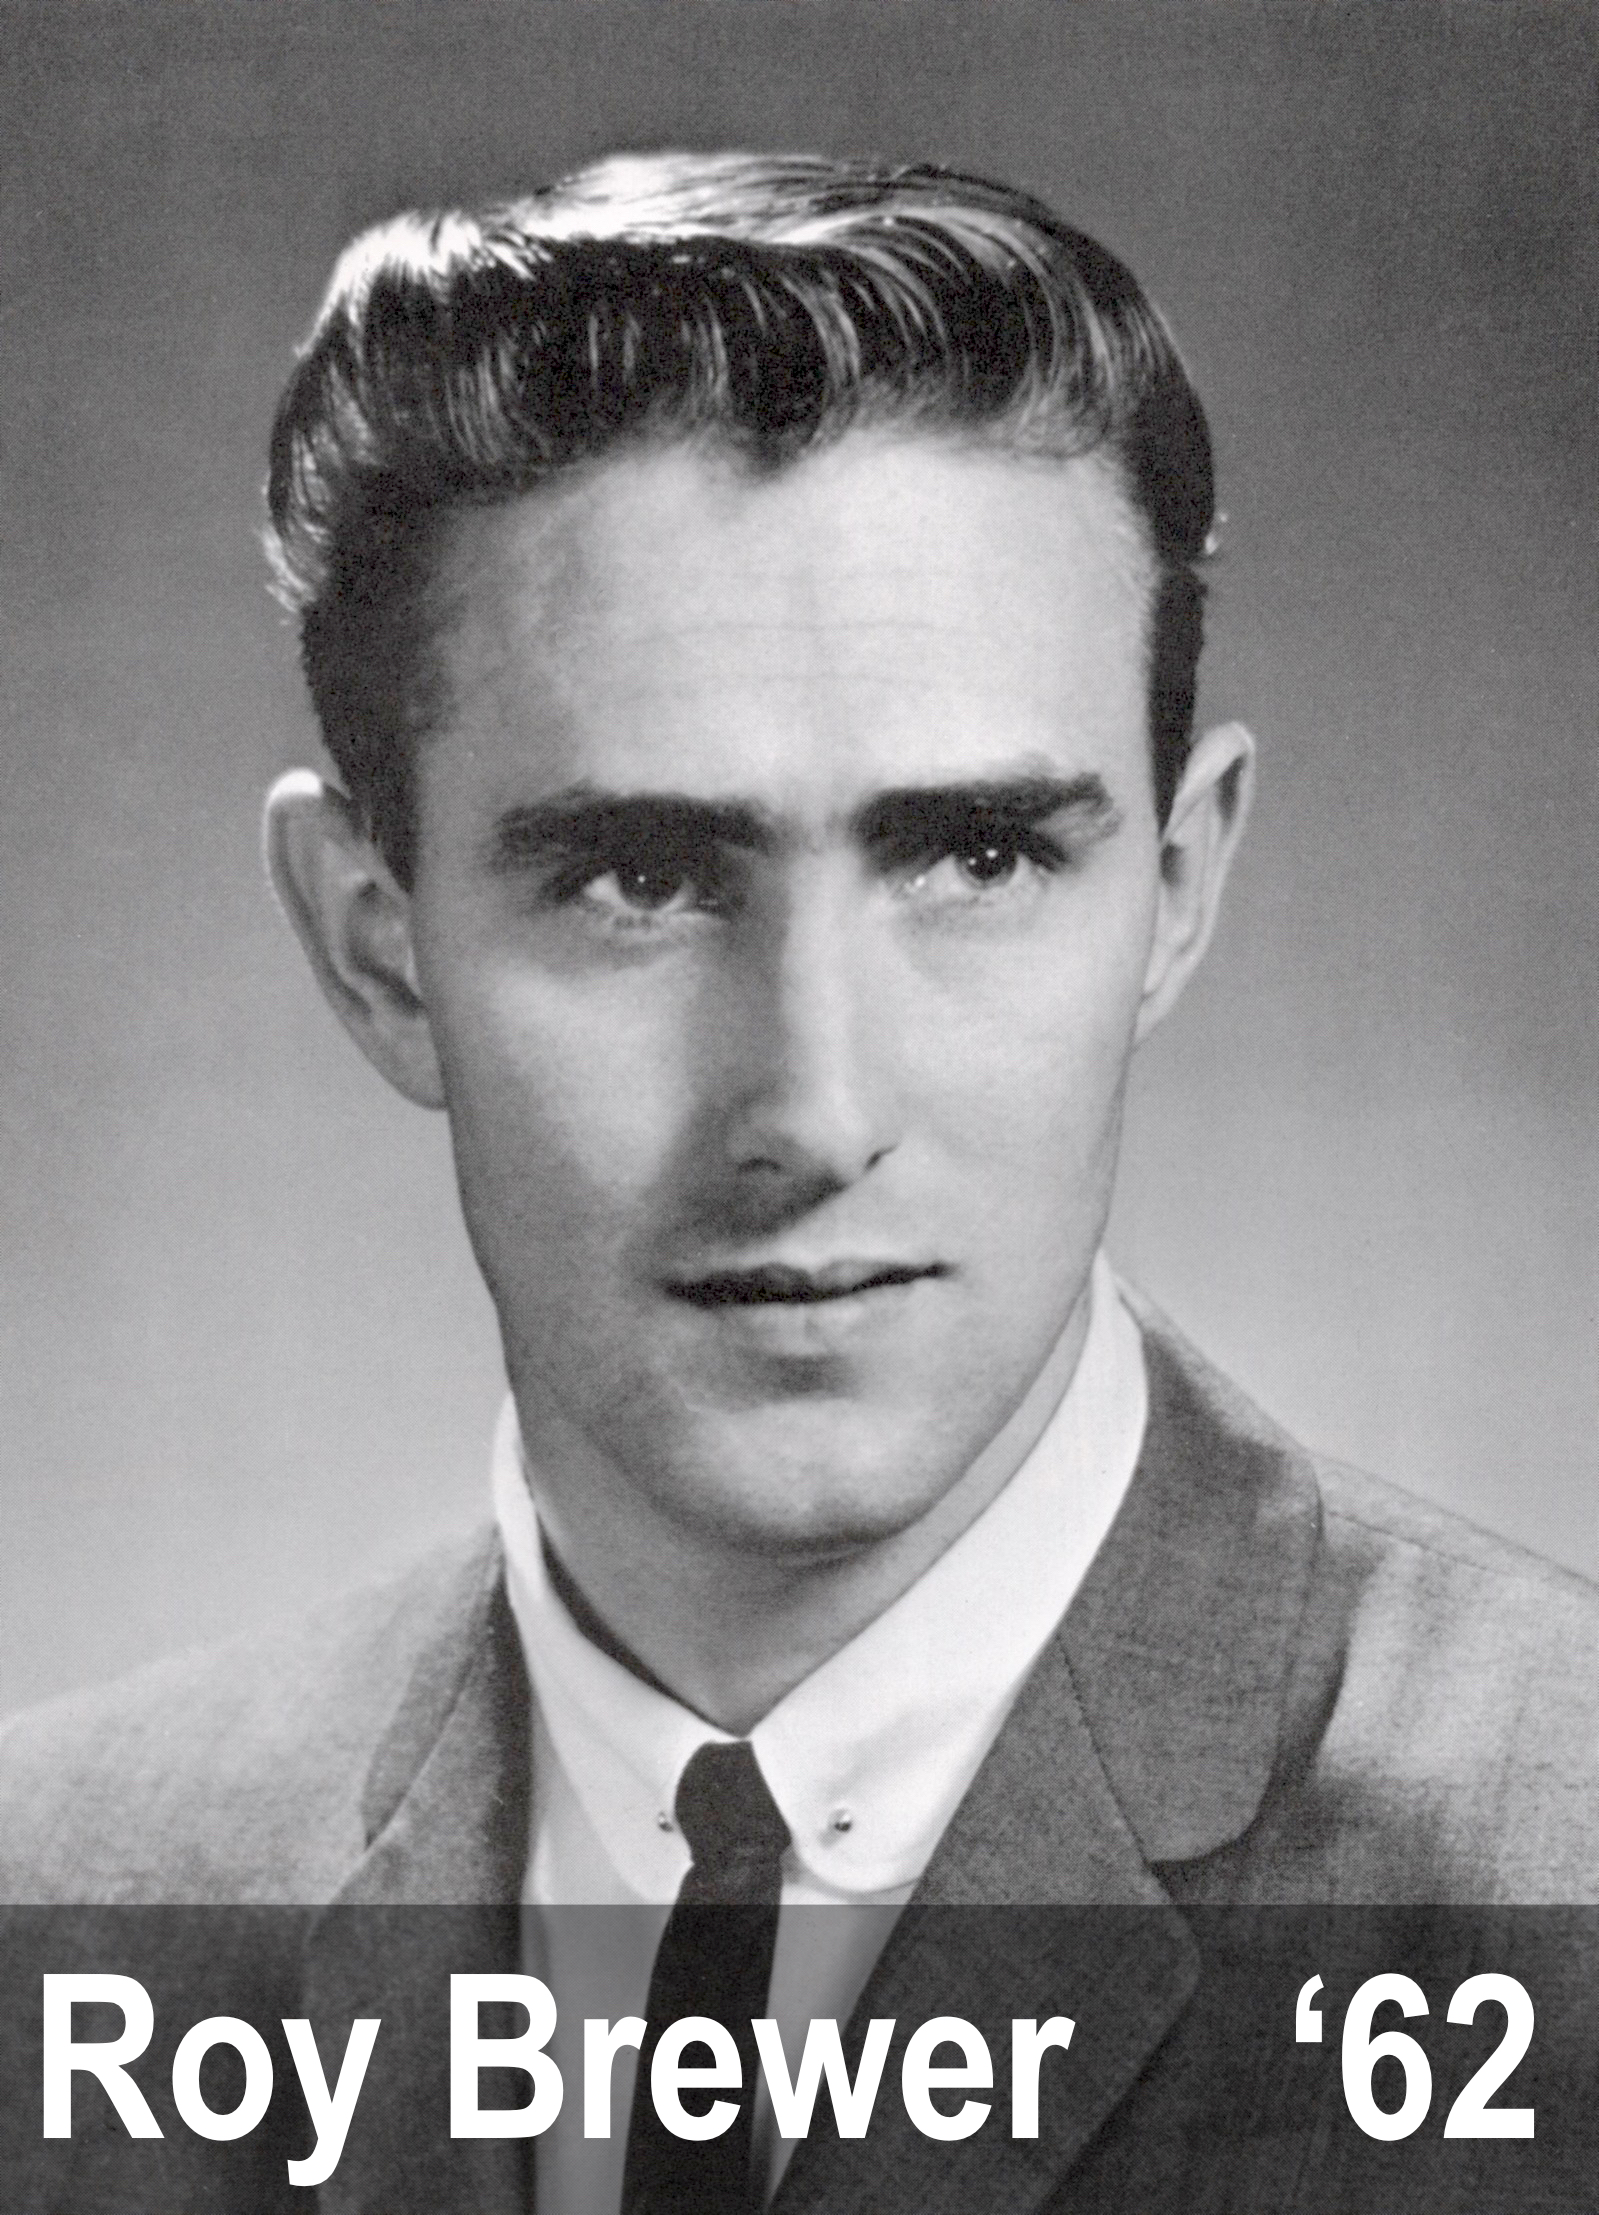 Photo of Roy Brewer from the 1961 NU Yearbook